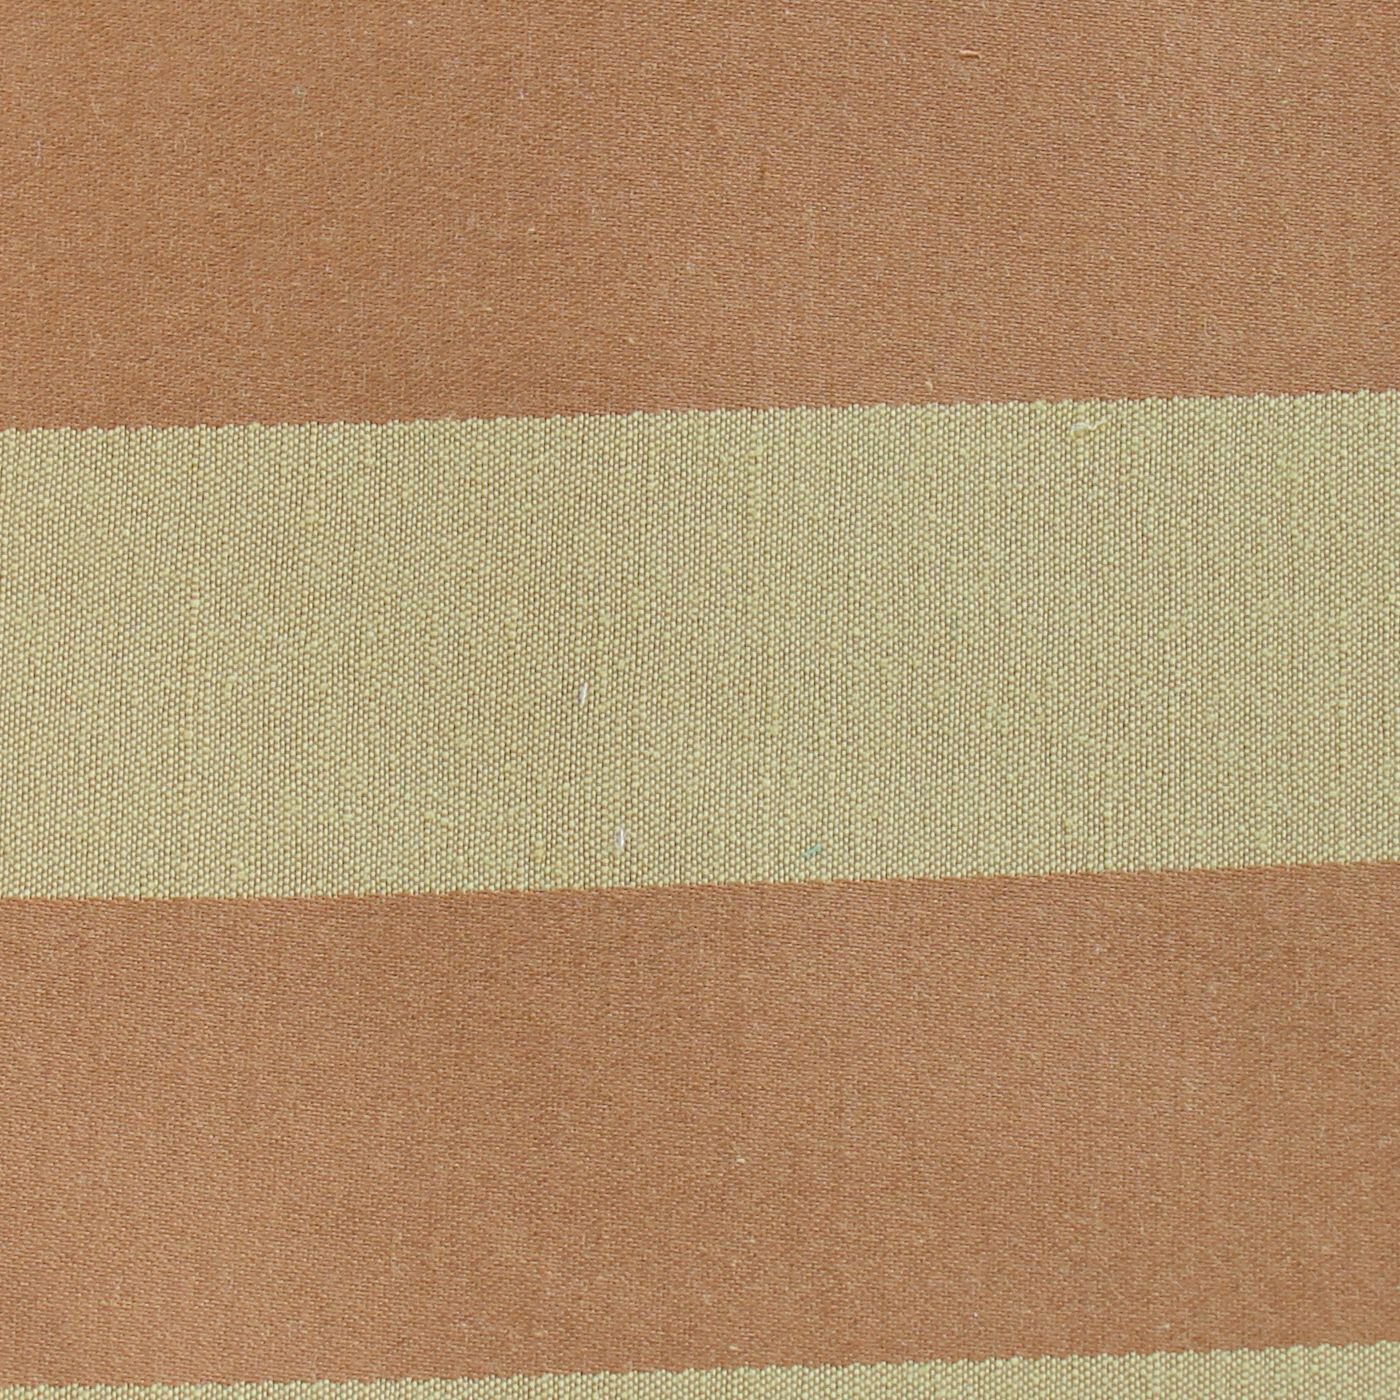 NO 18-45 RS X1 Plus NO 32 Fabric Upholstery Sample